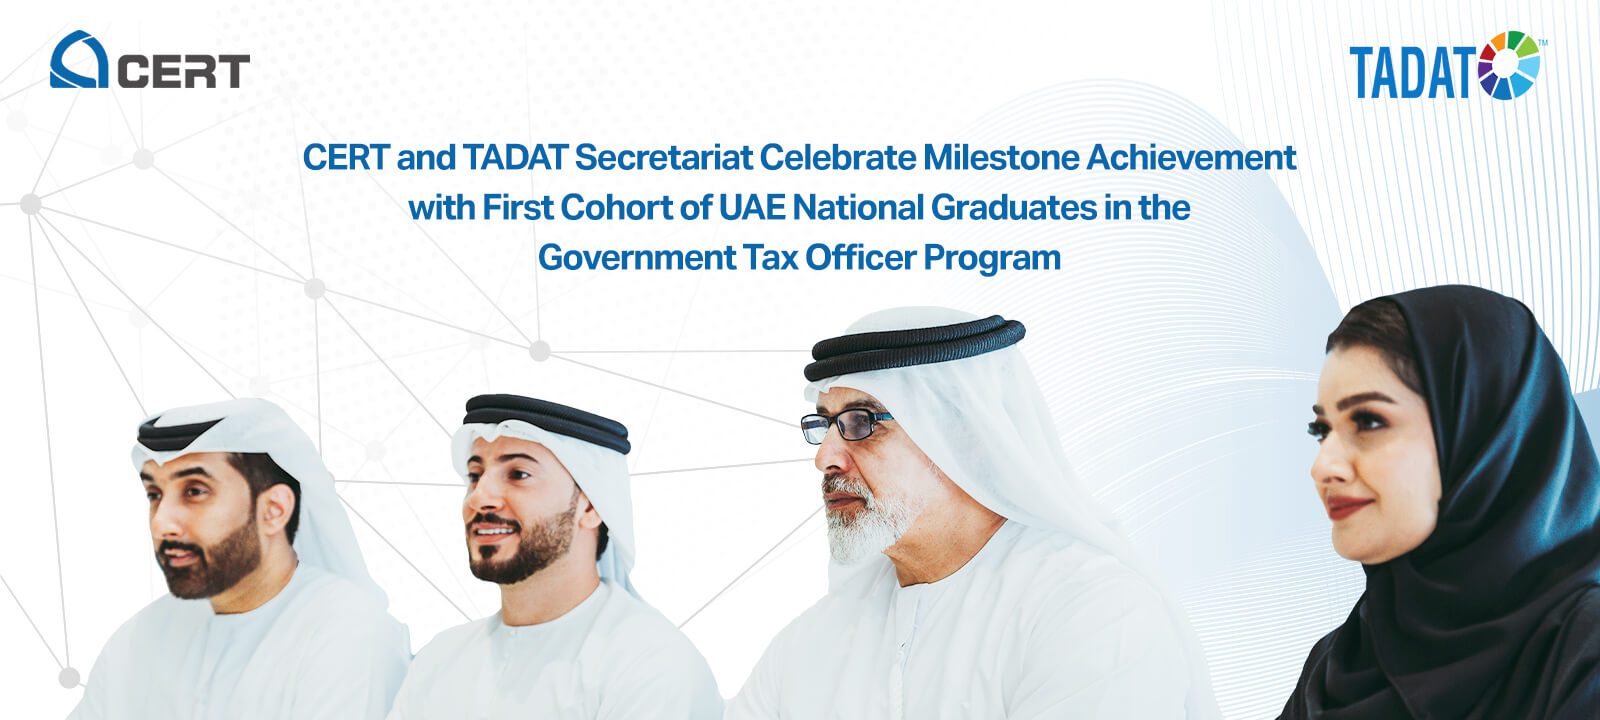 CERT and TADAT Secretariat Celebrate Milestone Achievement with First Cohort of UAE National Graduates in the Government Tax Officer Program